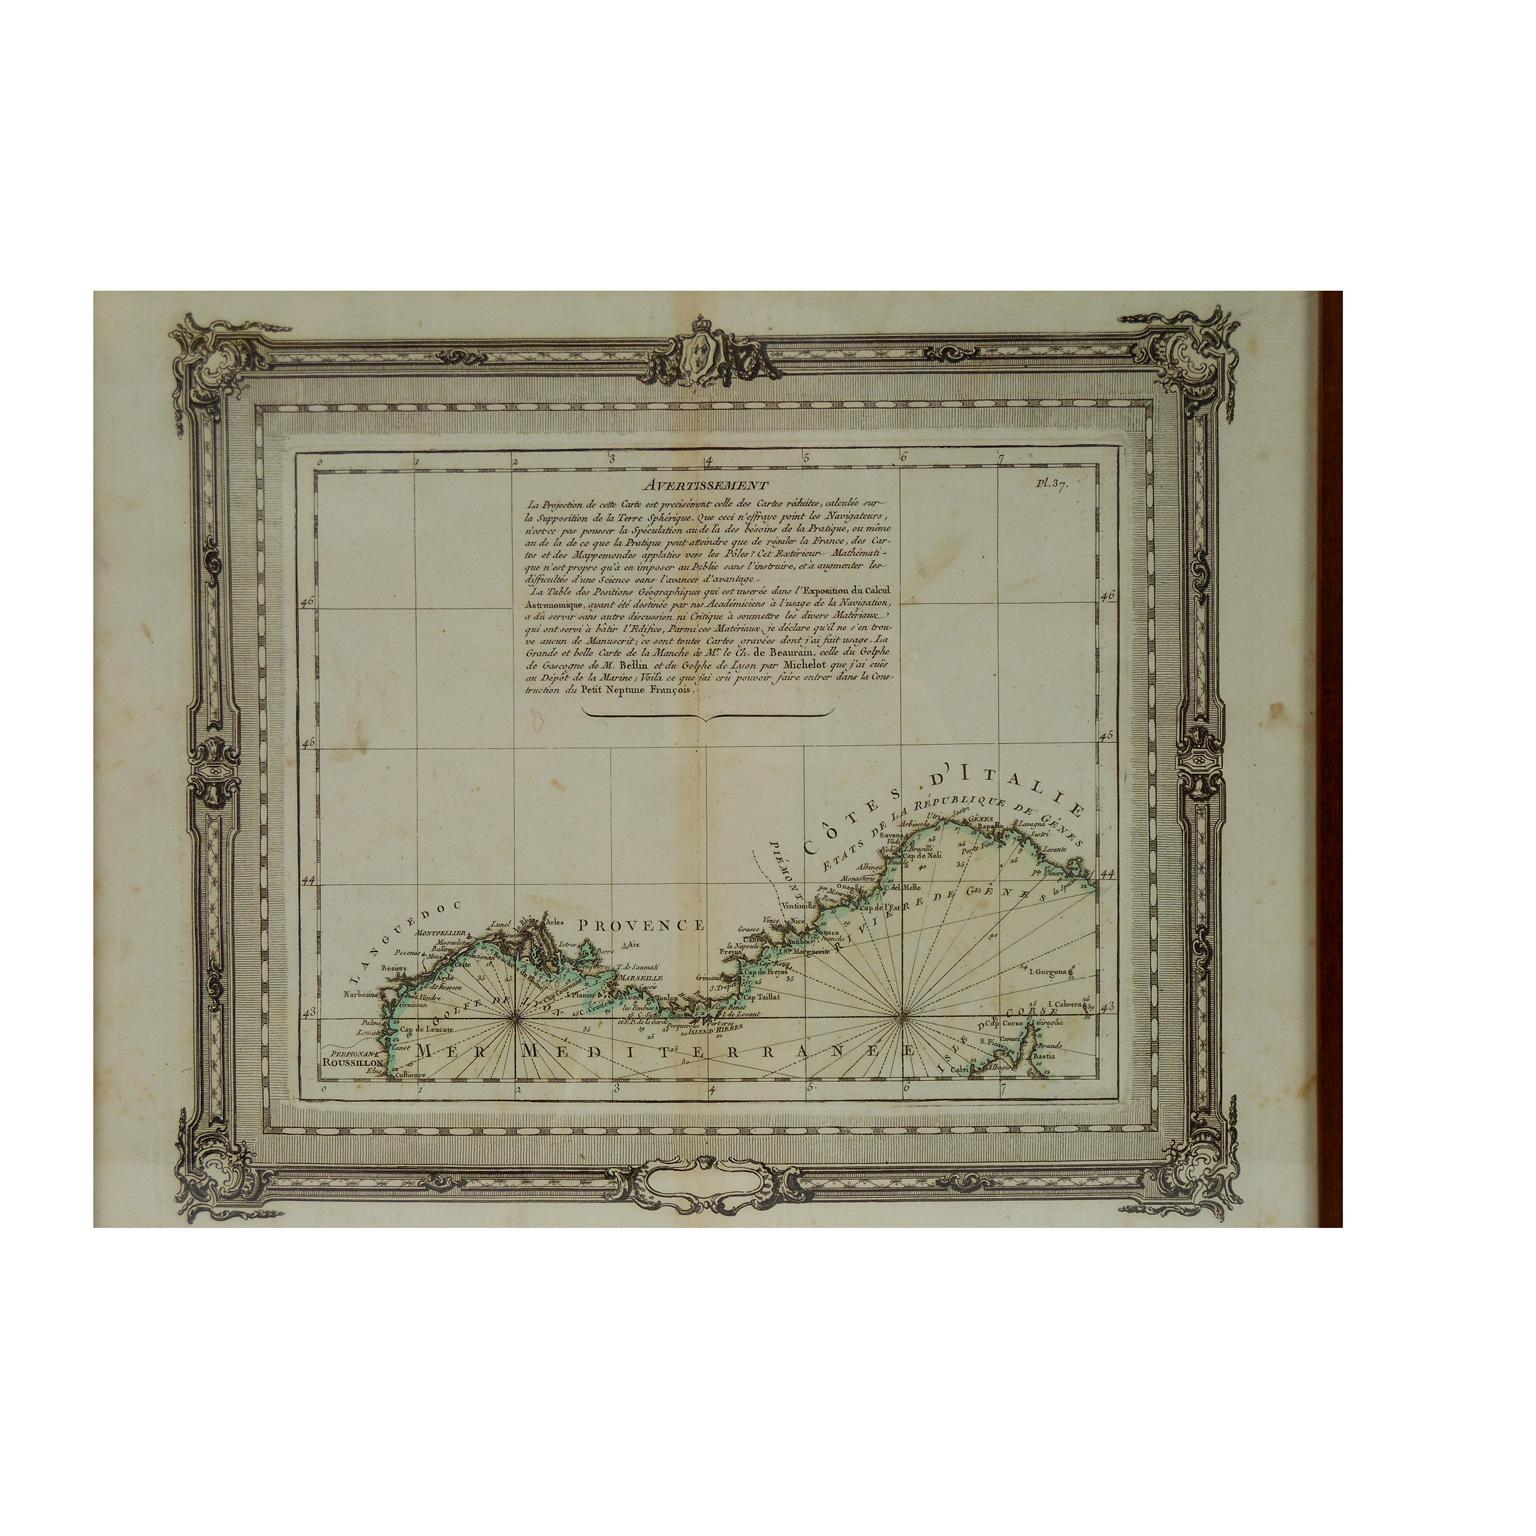 Antique nautical map of the Mediterranean sea from La Spezia to Roussillon, from Le petit Neptune françois published in Paris in 1763. Printed by engraved copper plate. Good condition. Measures with frame 36 x 31 cm - inches 14.17 x 12.20. Le petit